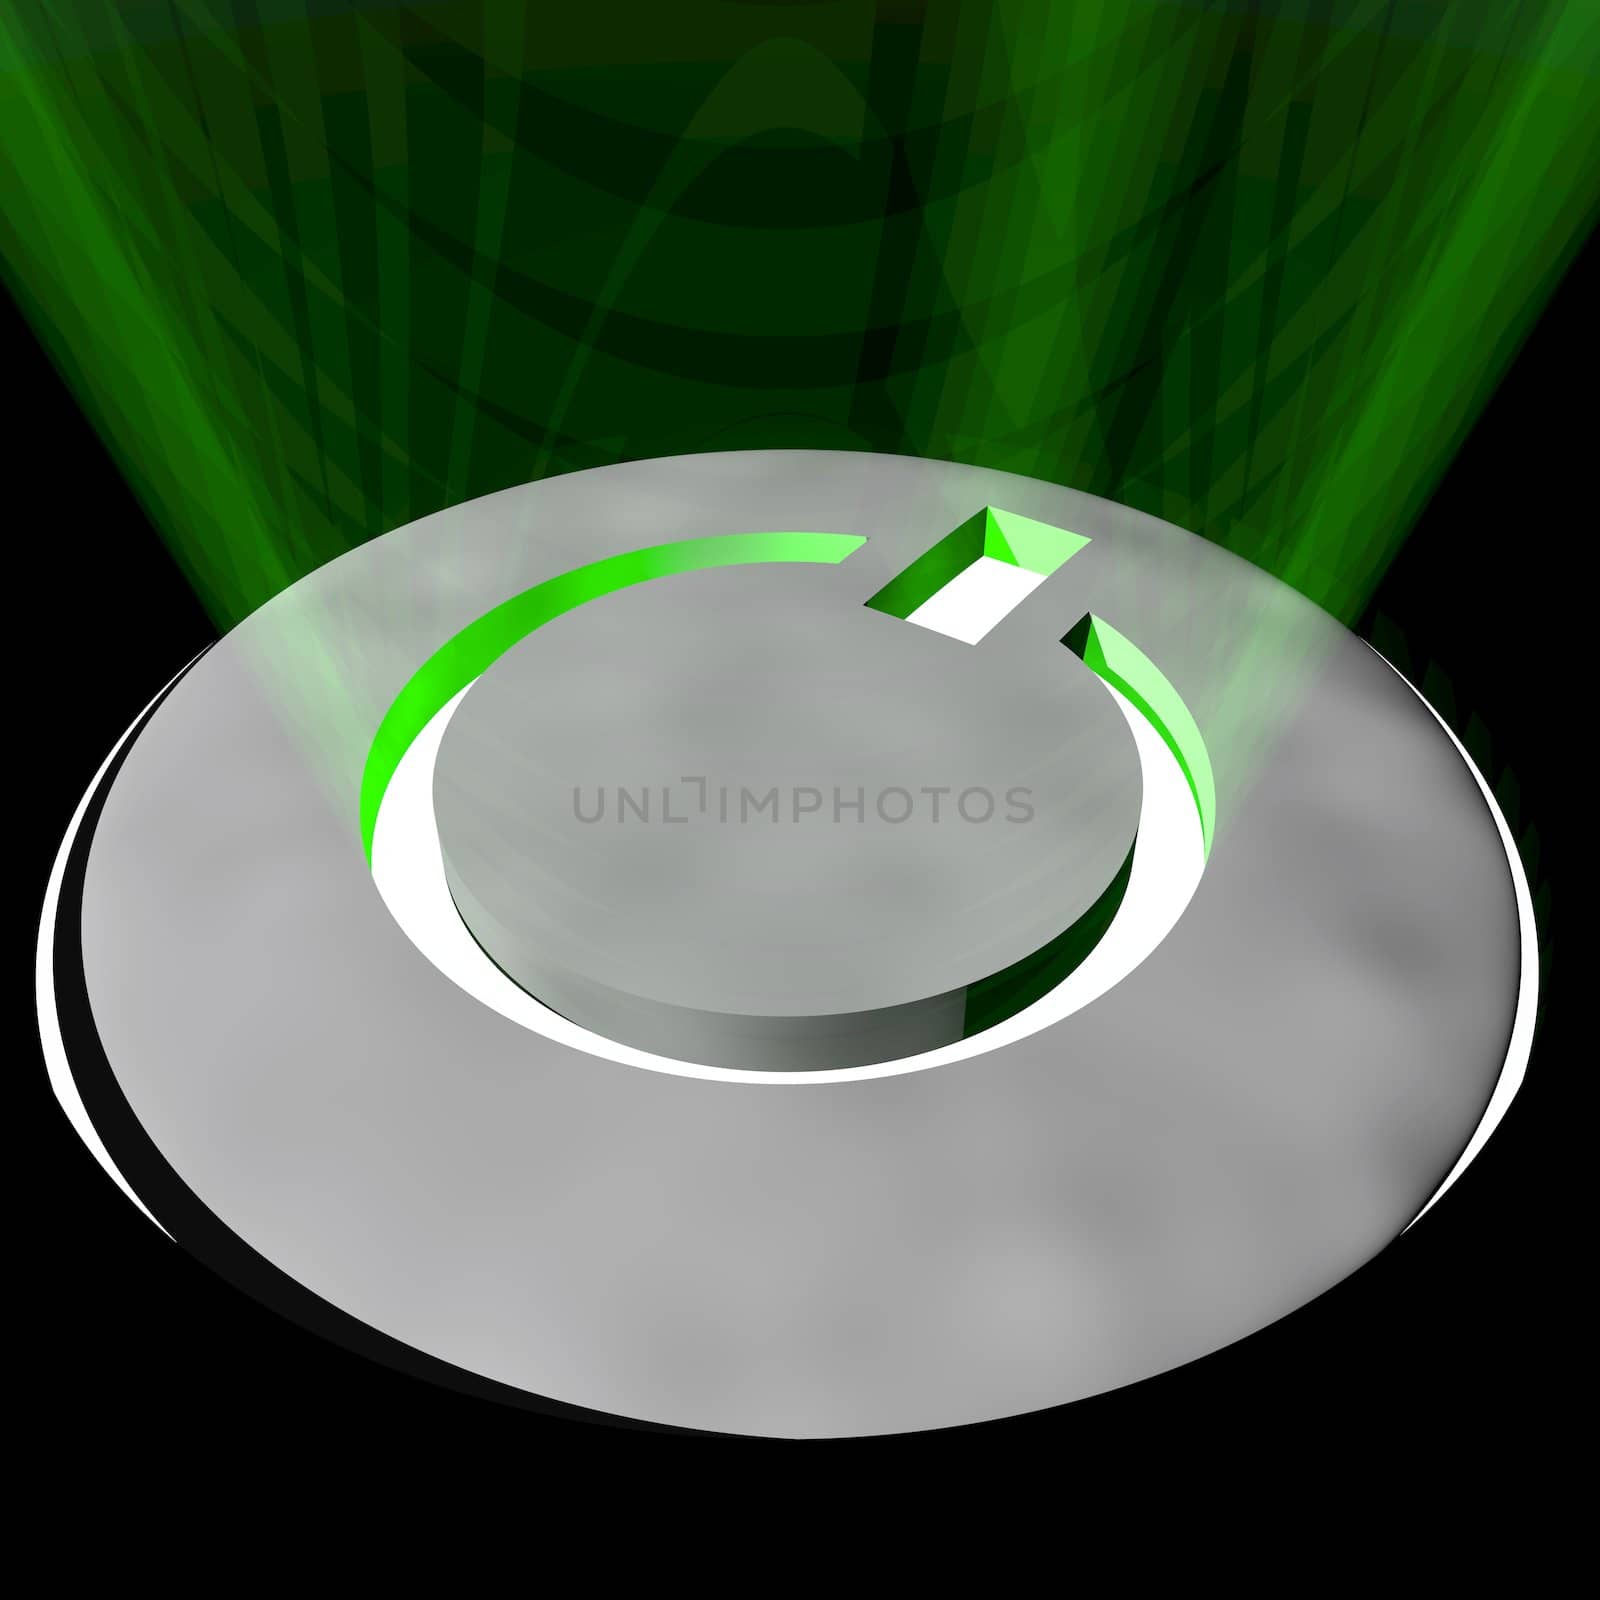 An electronic device�s power button glowing green.